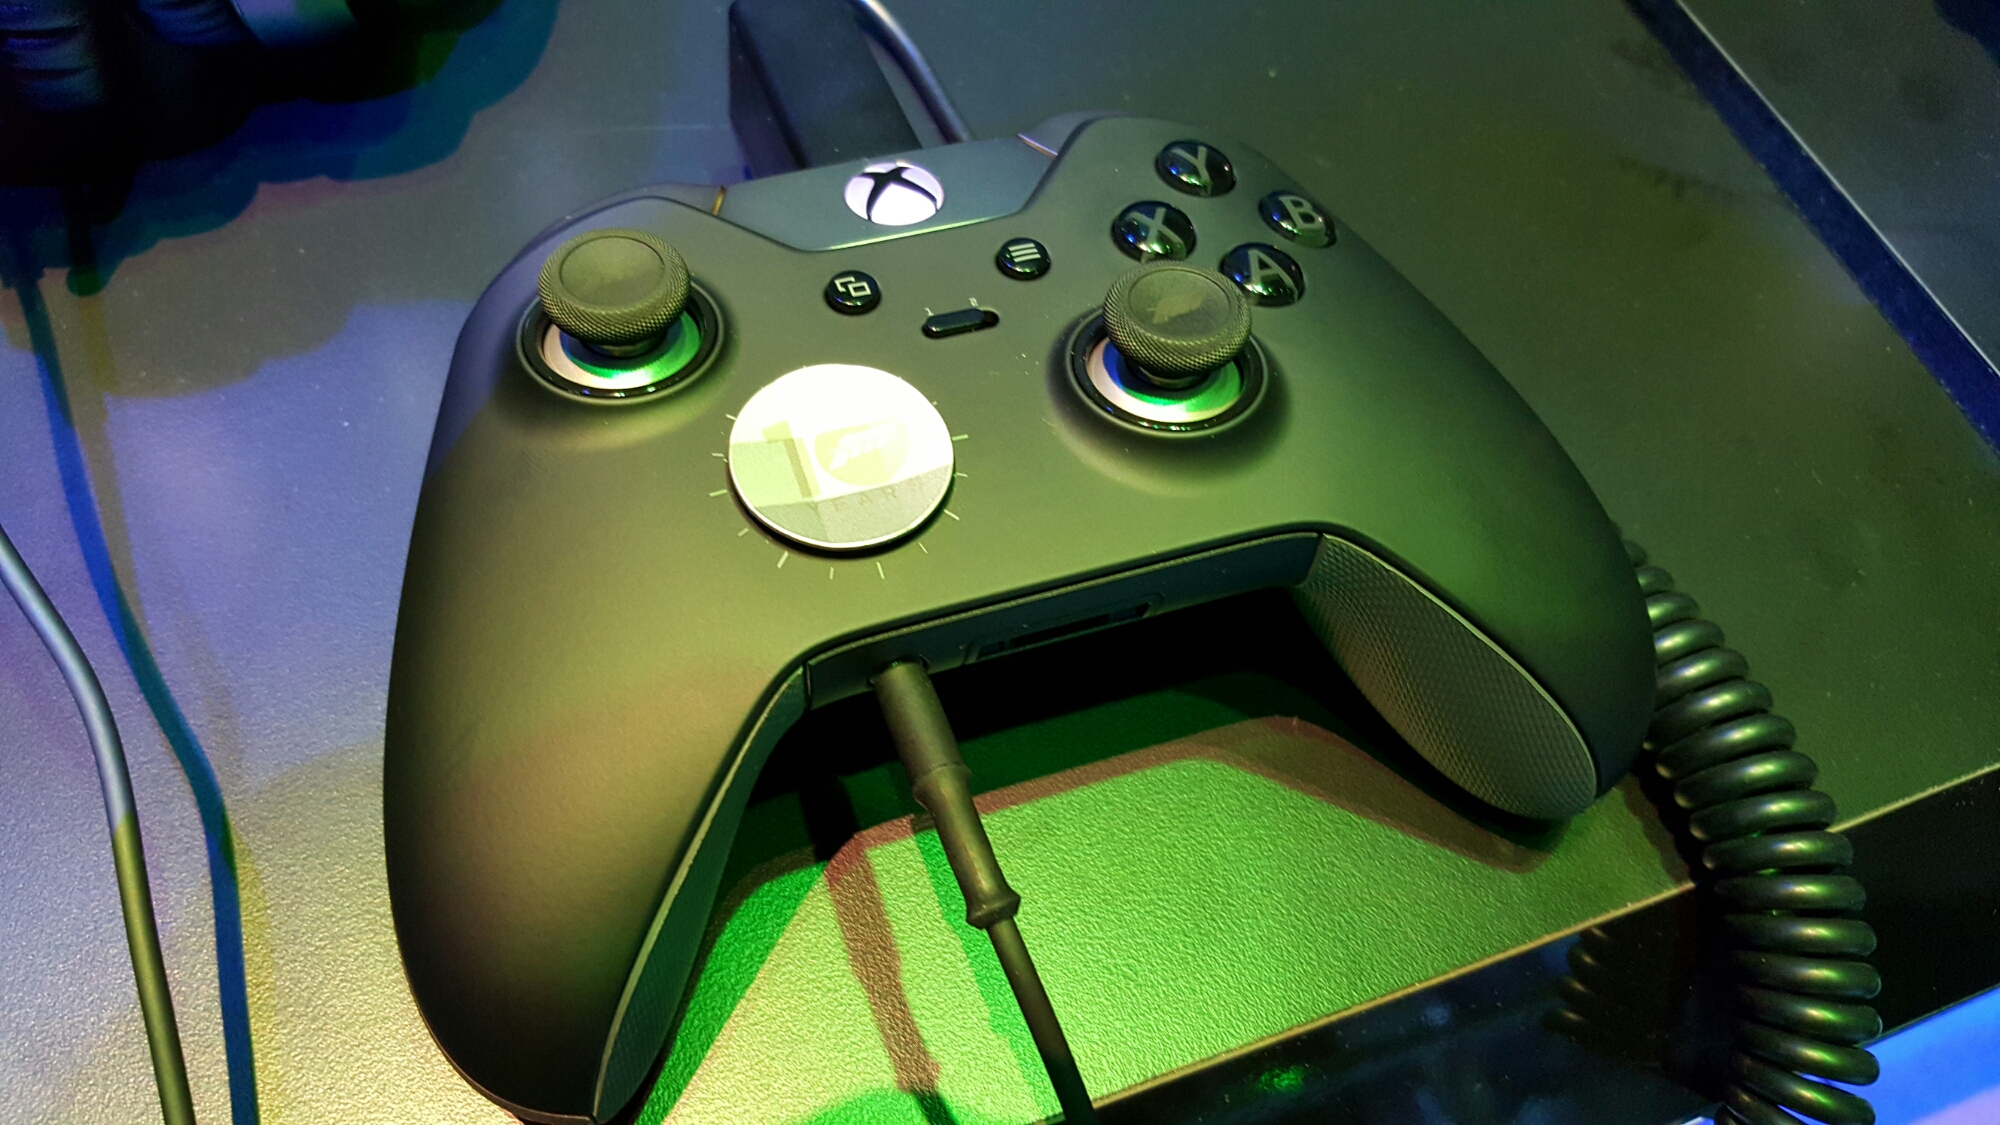 Elite Controller For Xbox One To Play The Game With Here Are Our